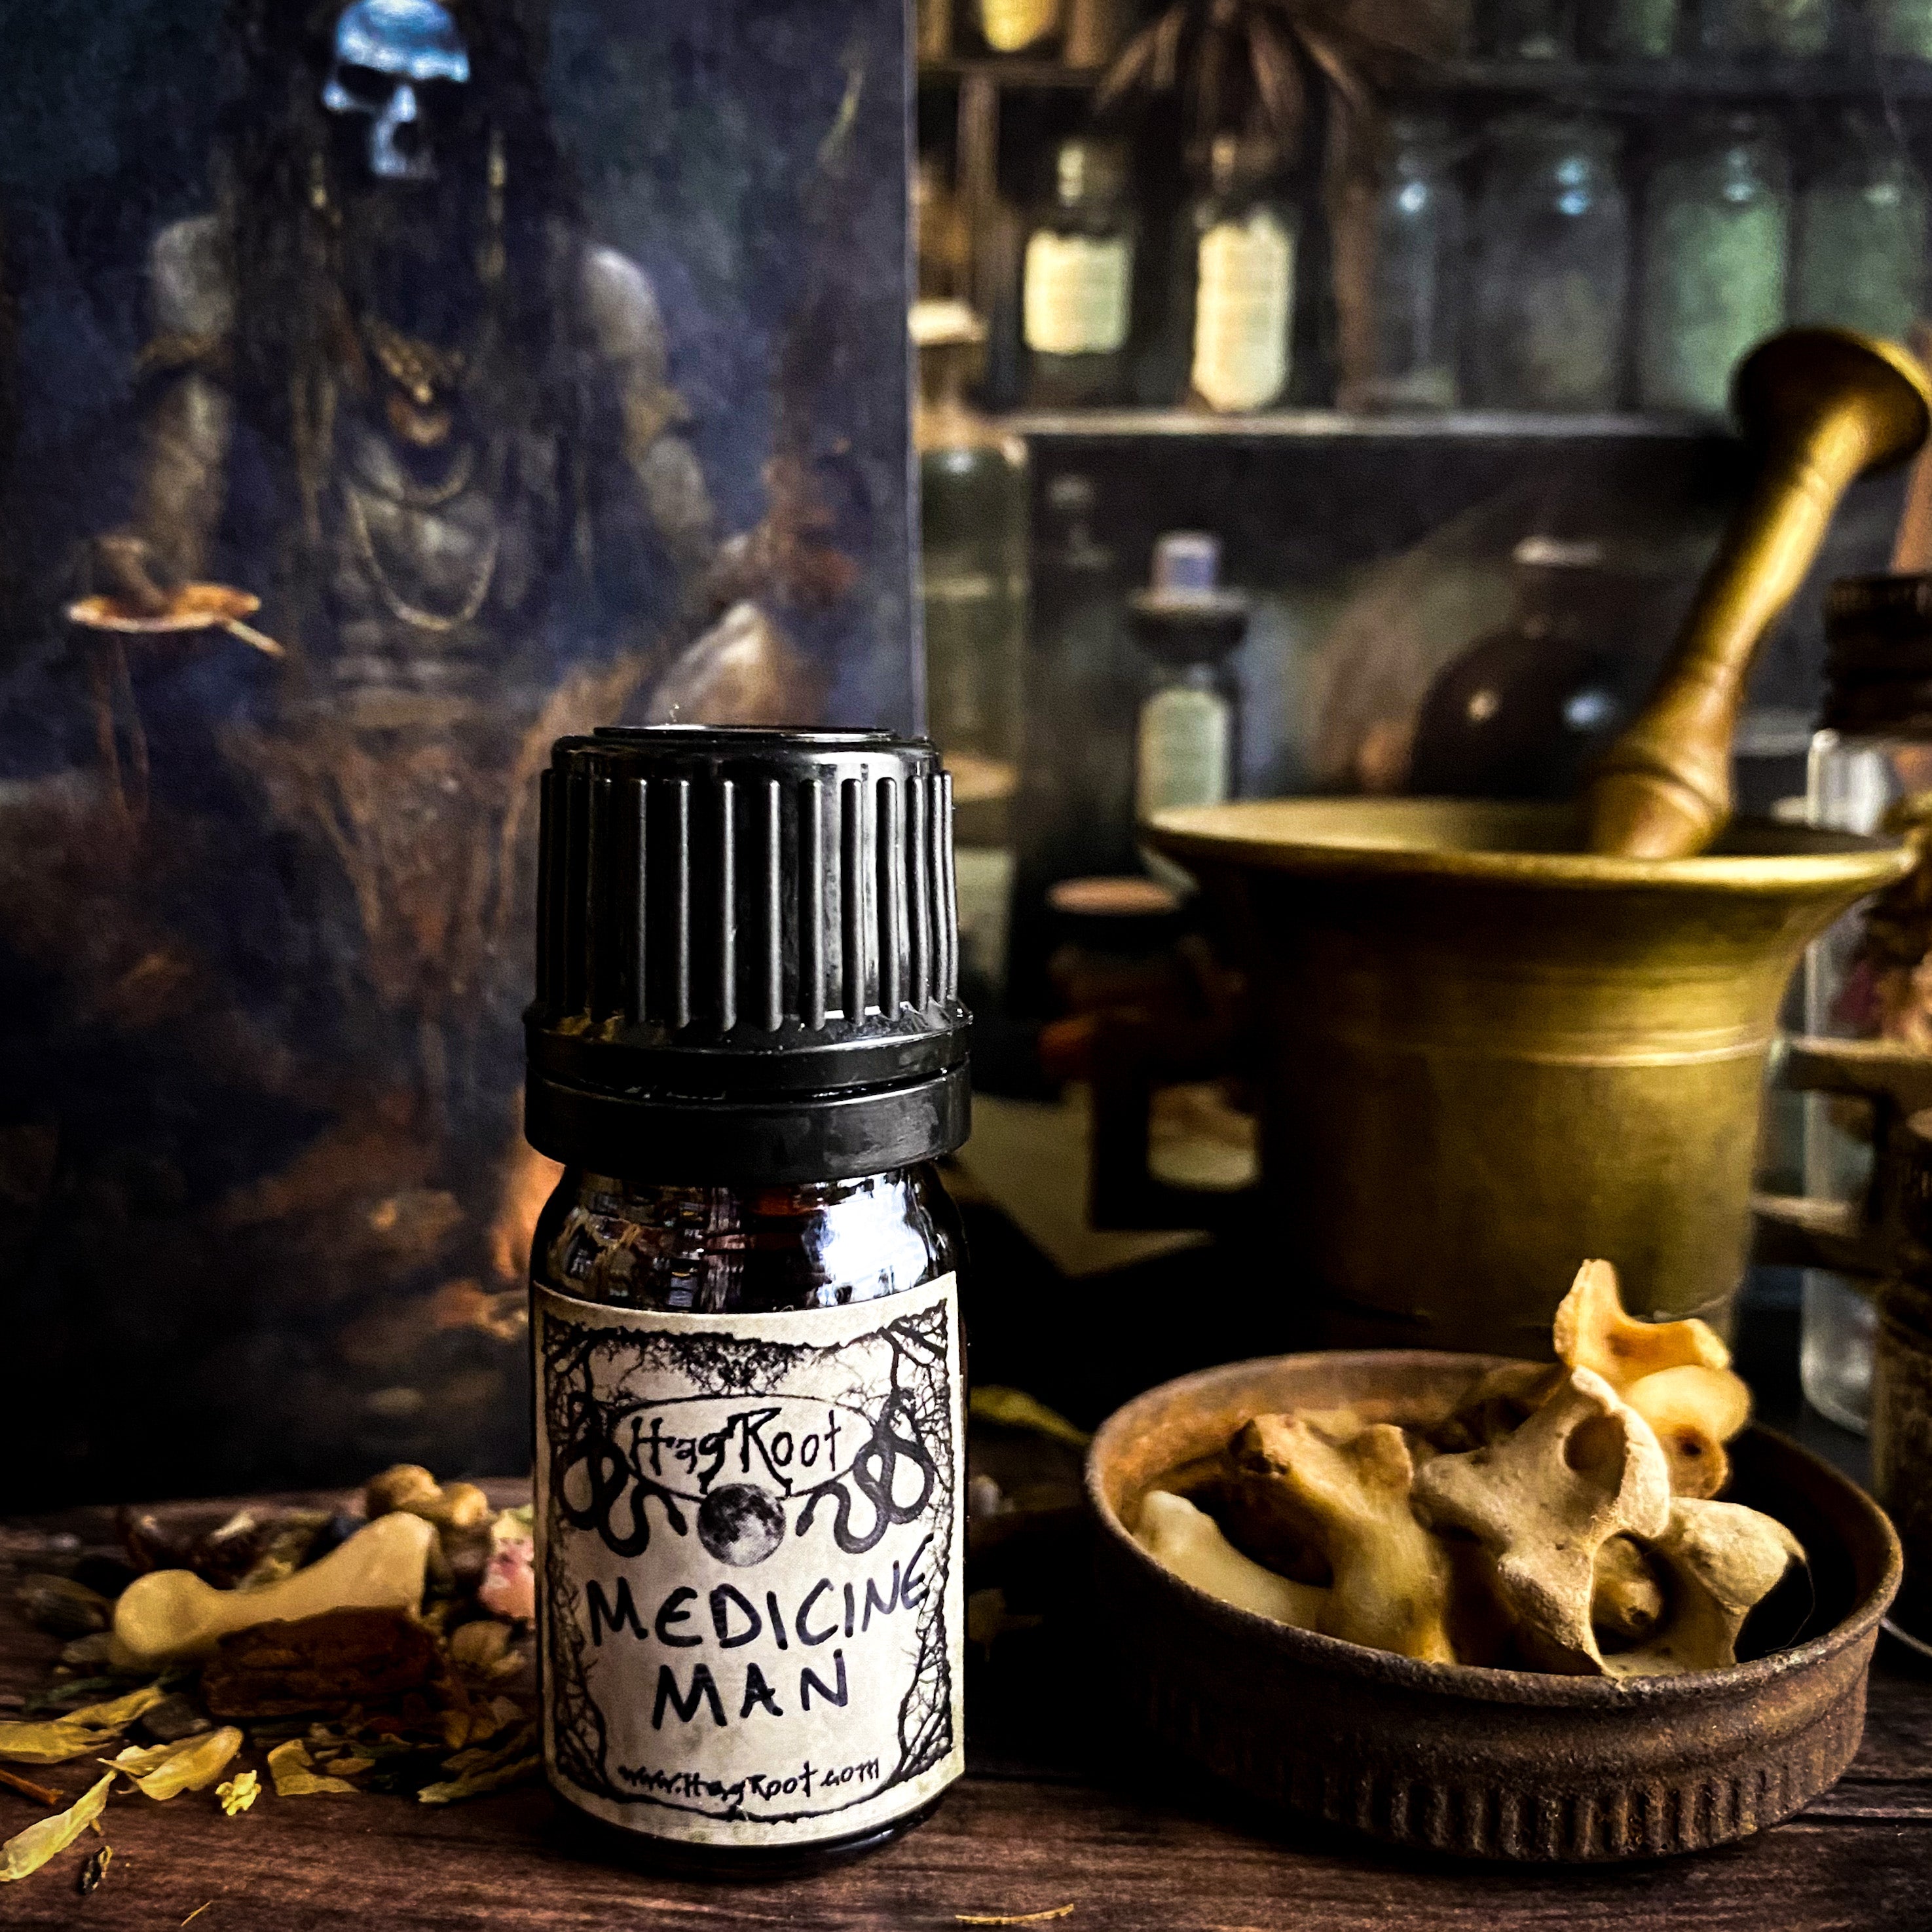 MEDICINE MAN-(Sweetgrass, Tobacco, Cedar, Leather, Ceremonial Offerings)-Perfume, Cologne, Anointing, Ritual Oil